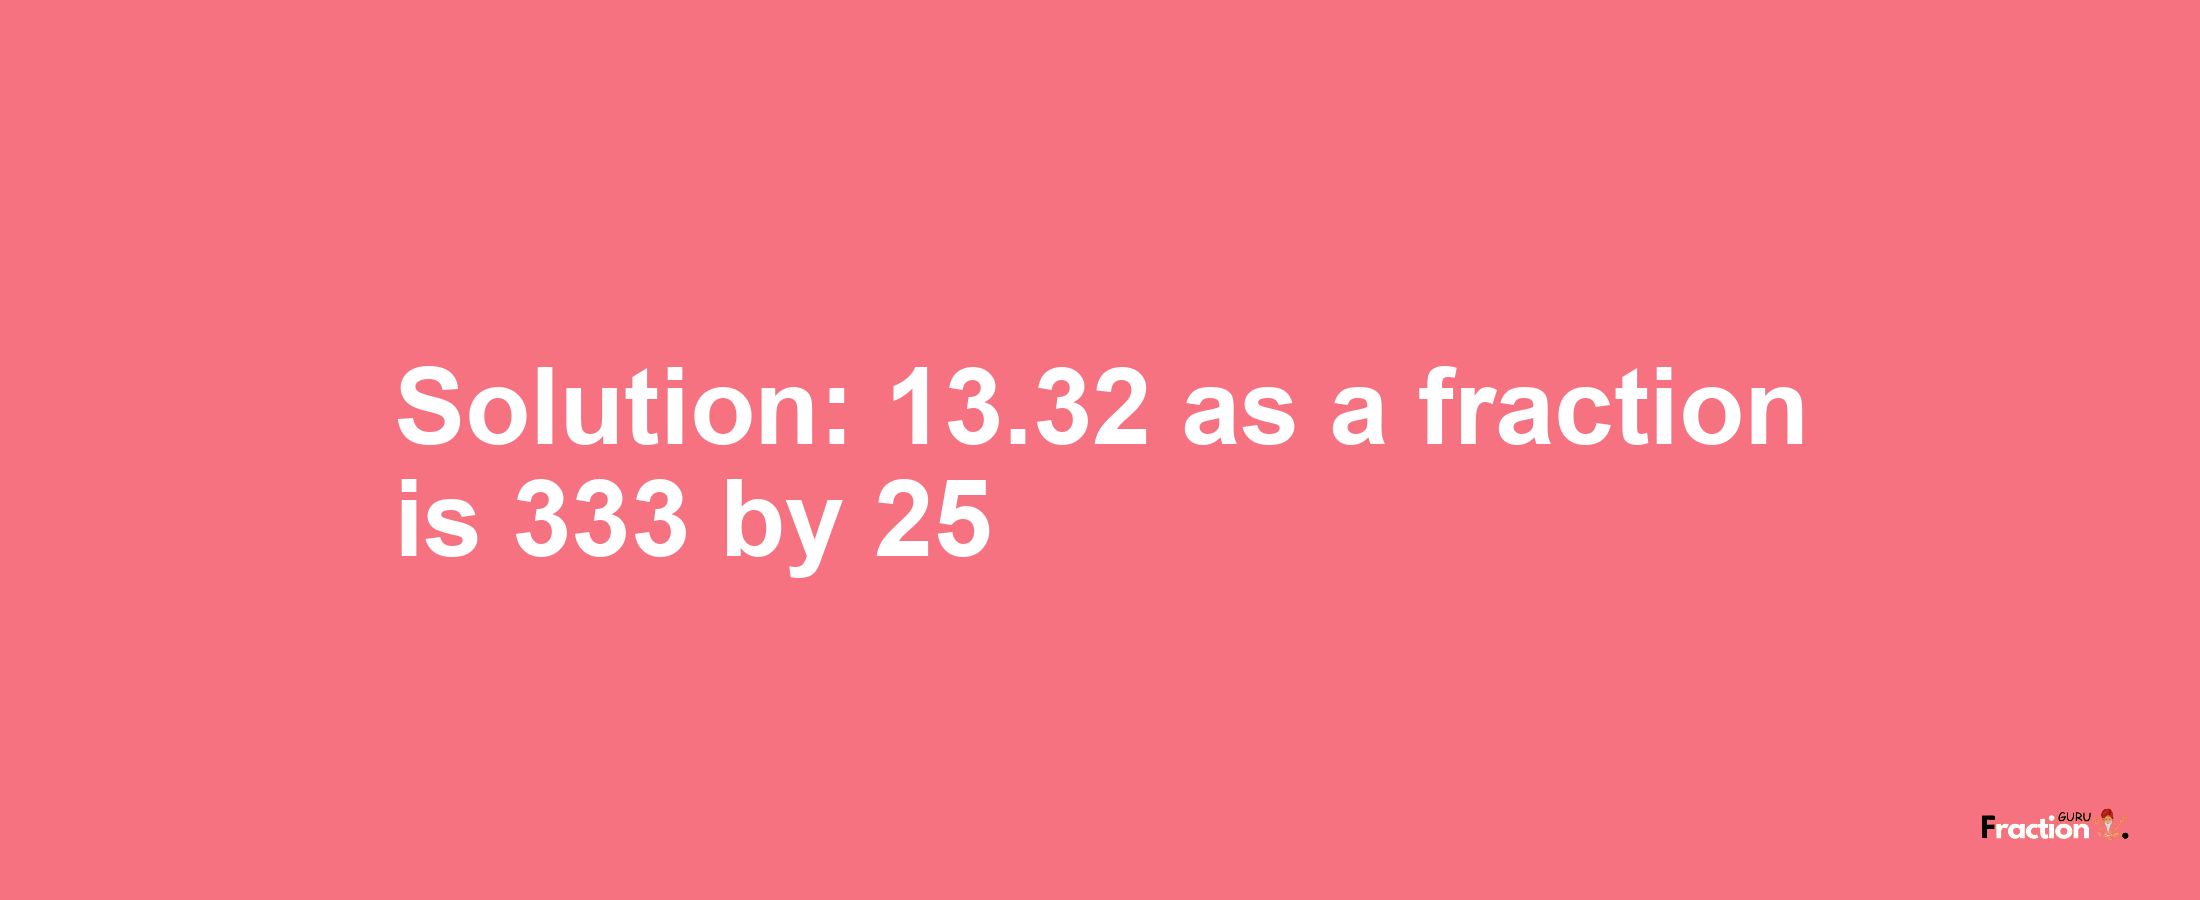 Solution:13.32 as a fraction is 333/25